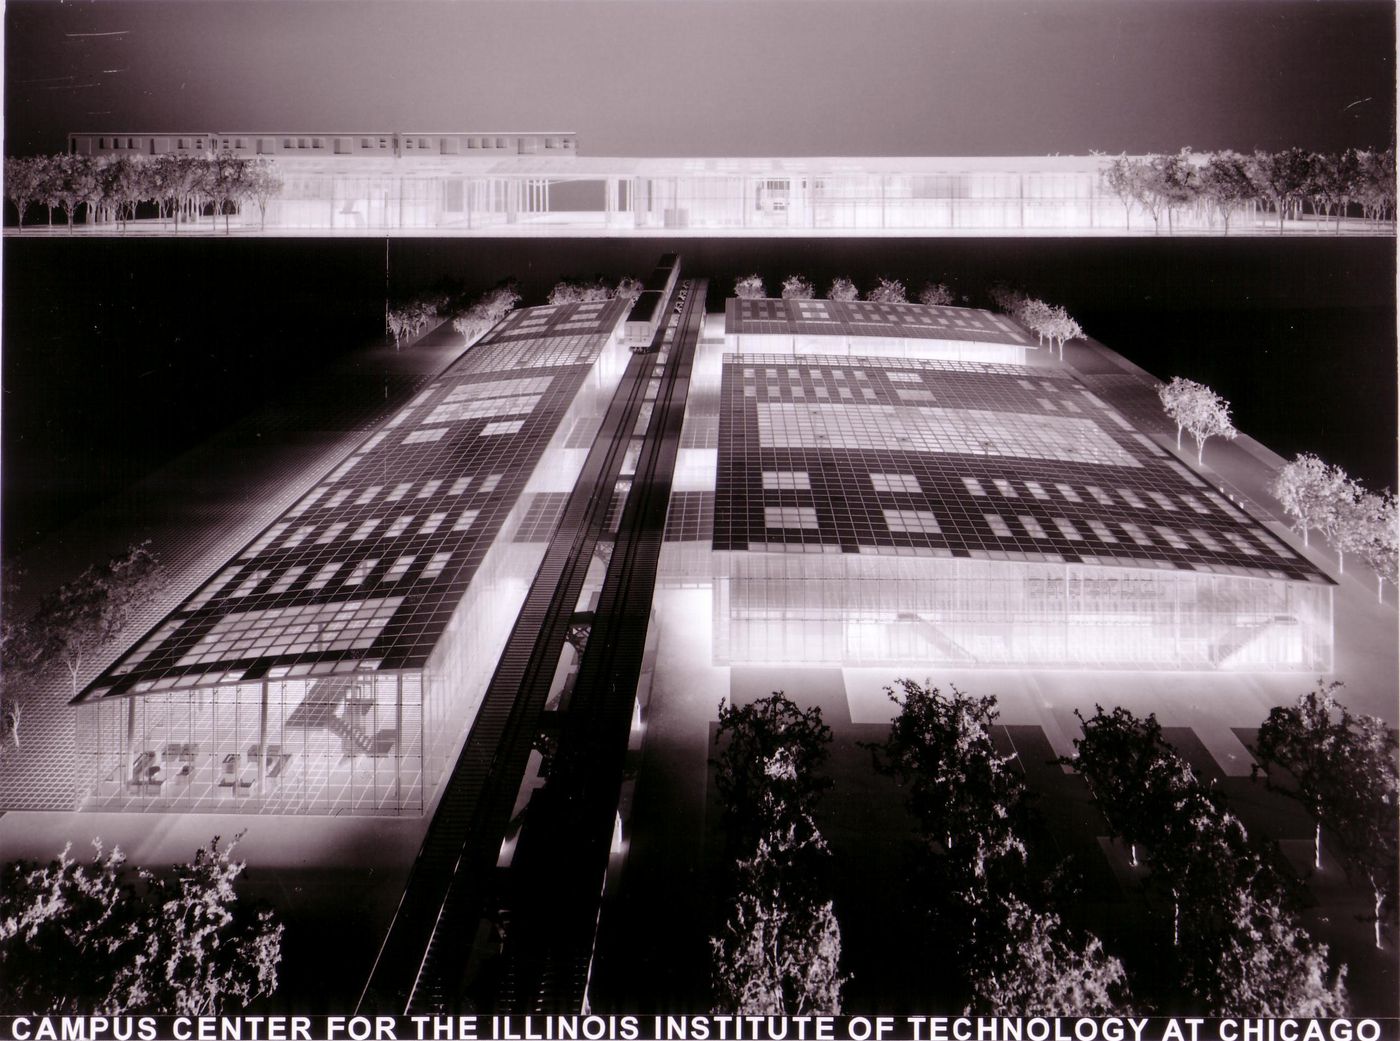 Two views of model, submission to the Richard H. Driehaus Foundation International Design Competition for a new campus center (1997-98), Illinois Institute of Technology, Chicago, Illinois